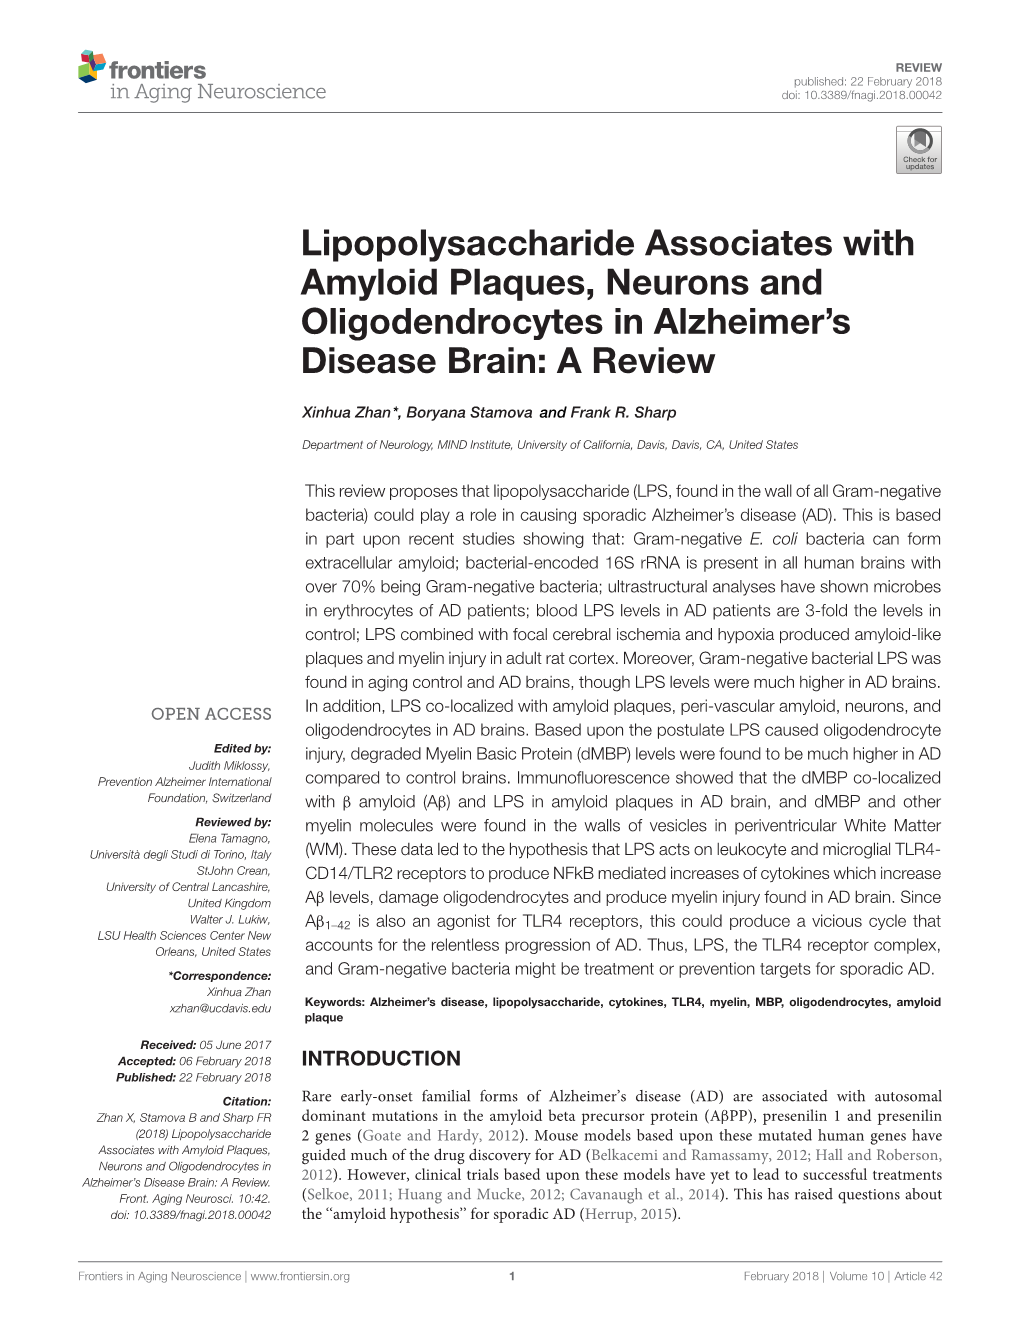 Lipopolysaccharide Associates with Amyloid Plaques, Neurons and Oligodendrocytes in Alzheimer’S Disease Brain: a Review